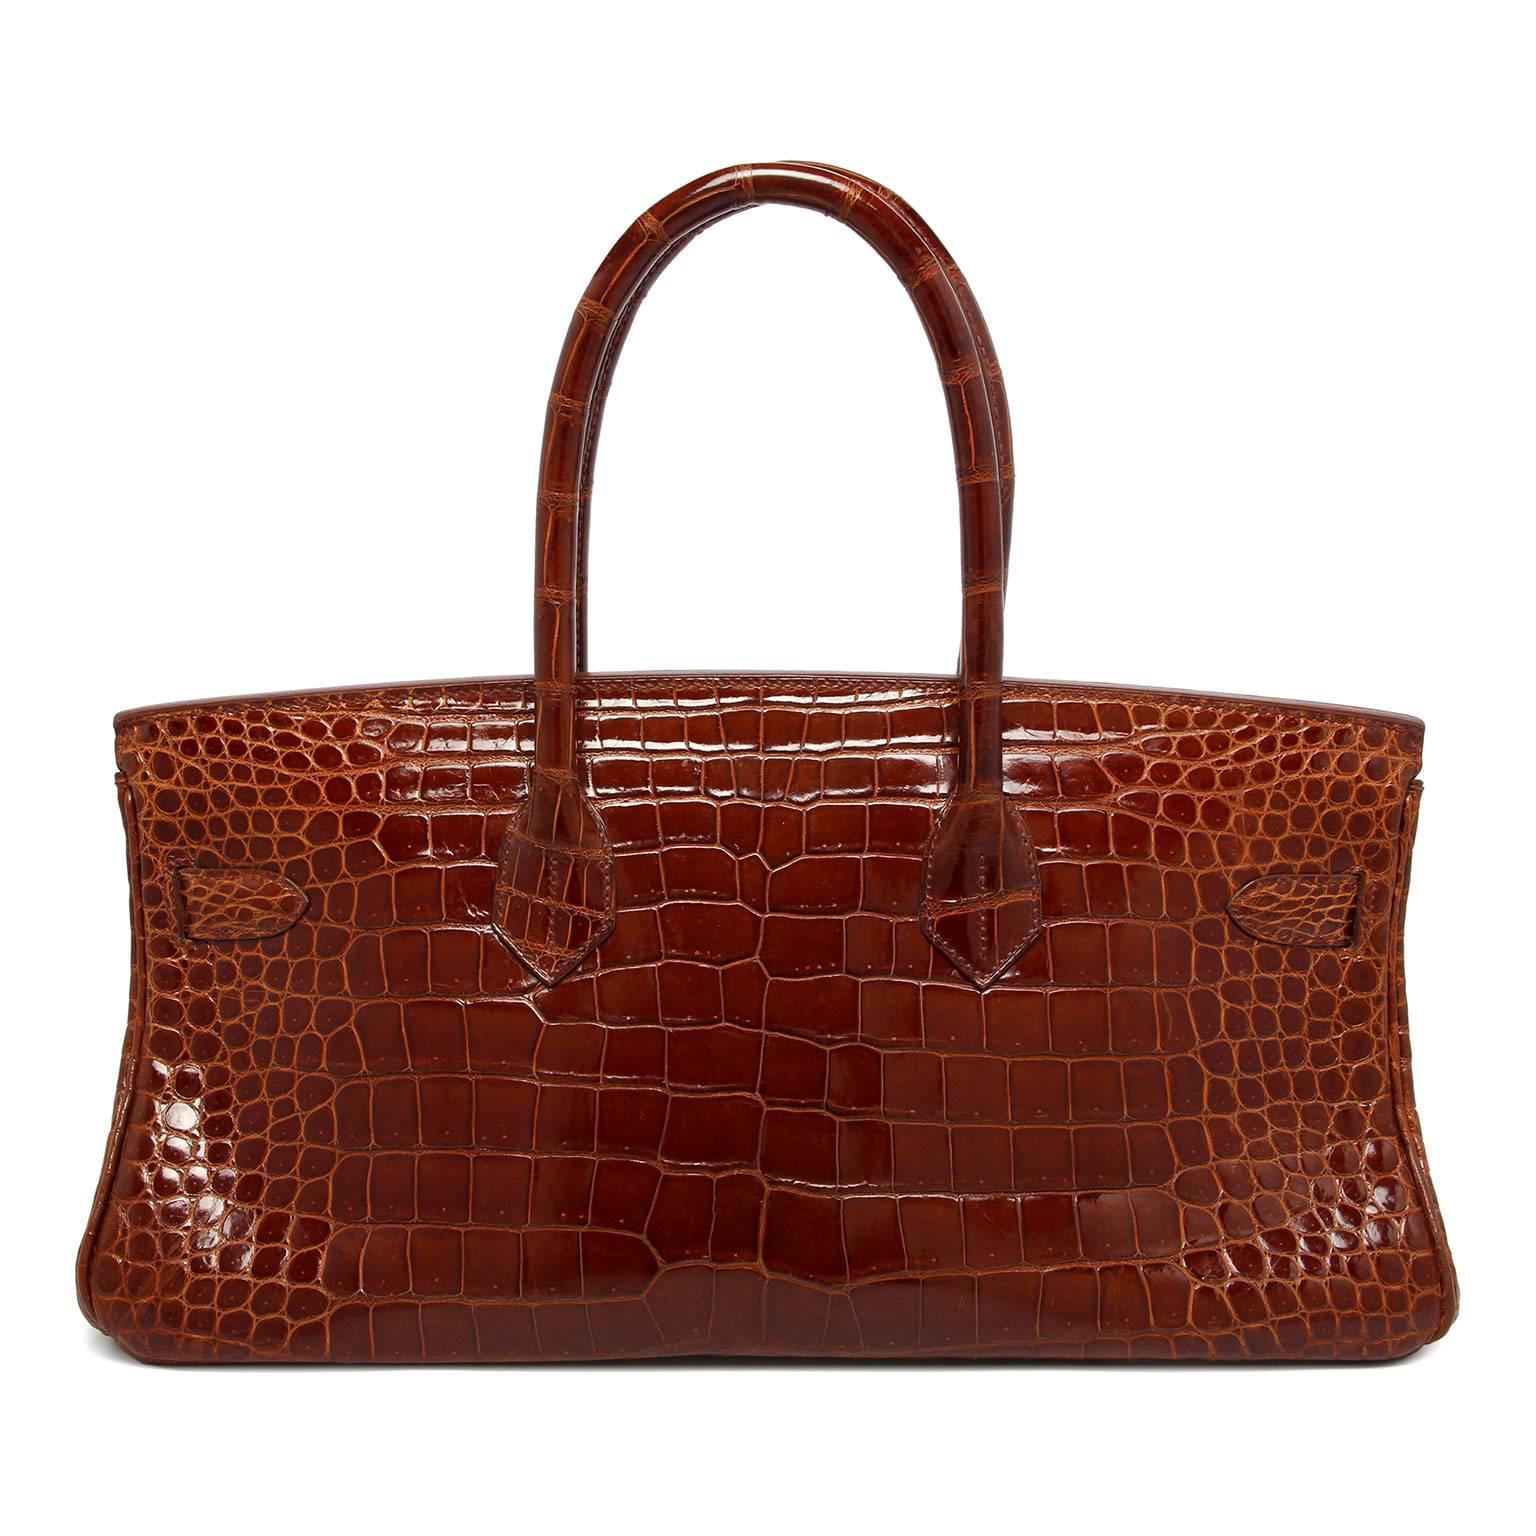 Limited edition
Hermes Jean-Paul Gaultier shoulder Birkin 
Miel Shiny porosus croc 
Palladium hardware 
Stamp: I Square 2005
Comes with Hermes cloth bag, clochette, lock & key.

Very few of this style were made in croc so this is a true